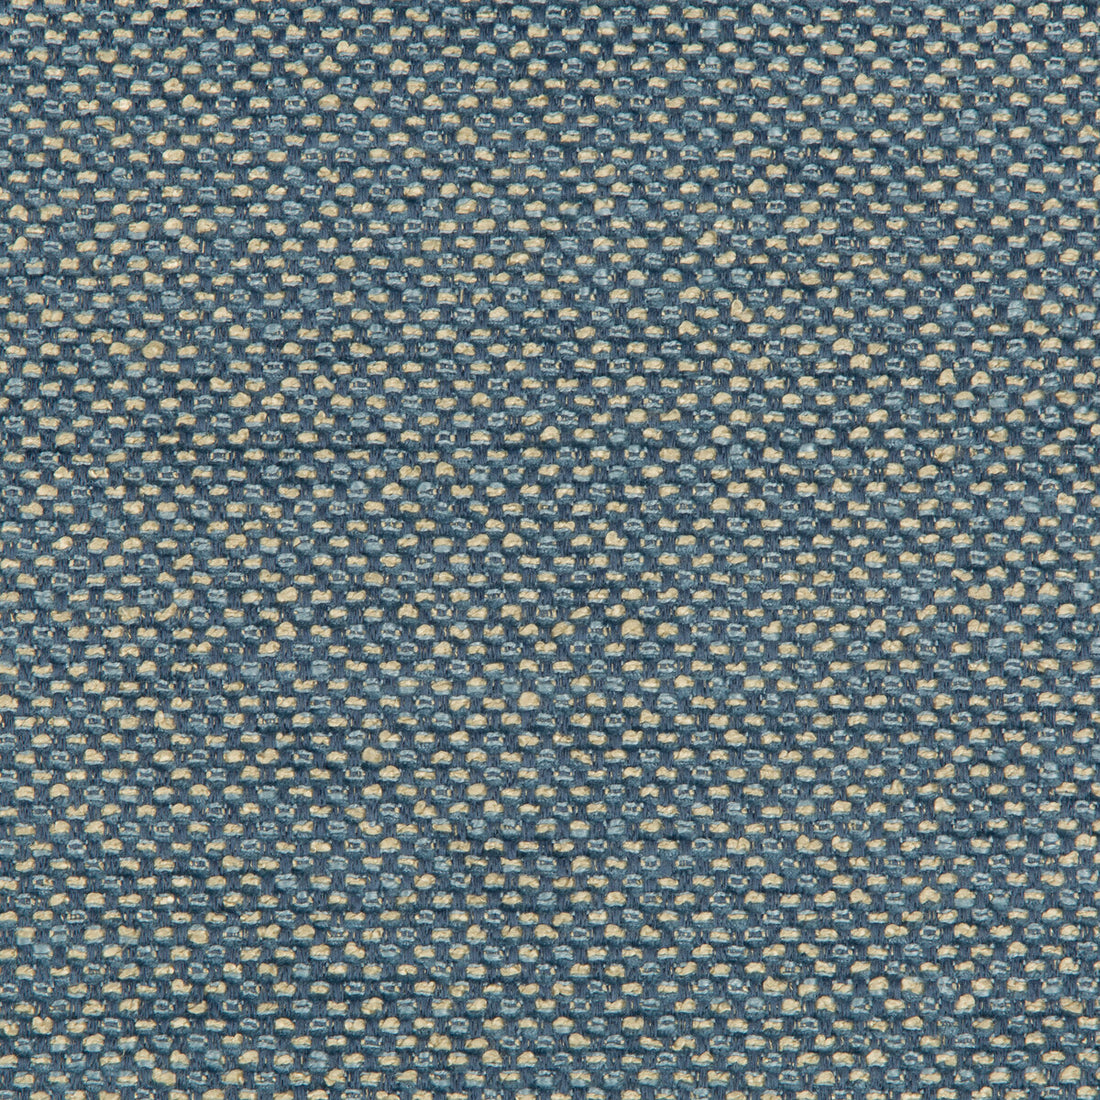 Kravet Design fabric in 34976-516 color - pattern 34976.516.0 - by Kravet Design in the Performance Crypton Home collection